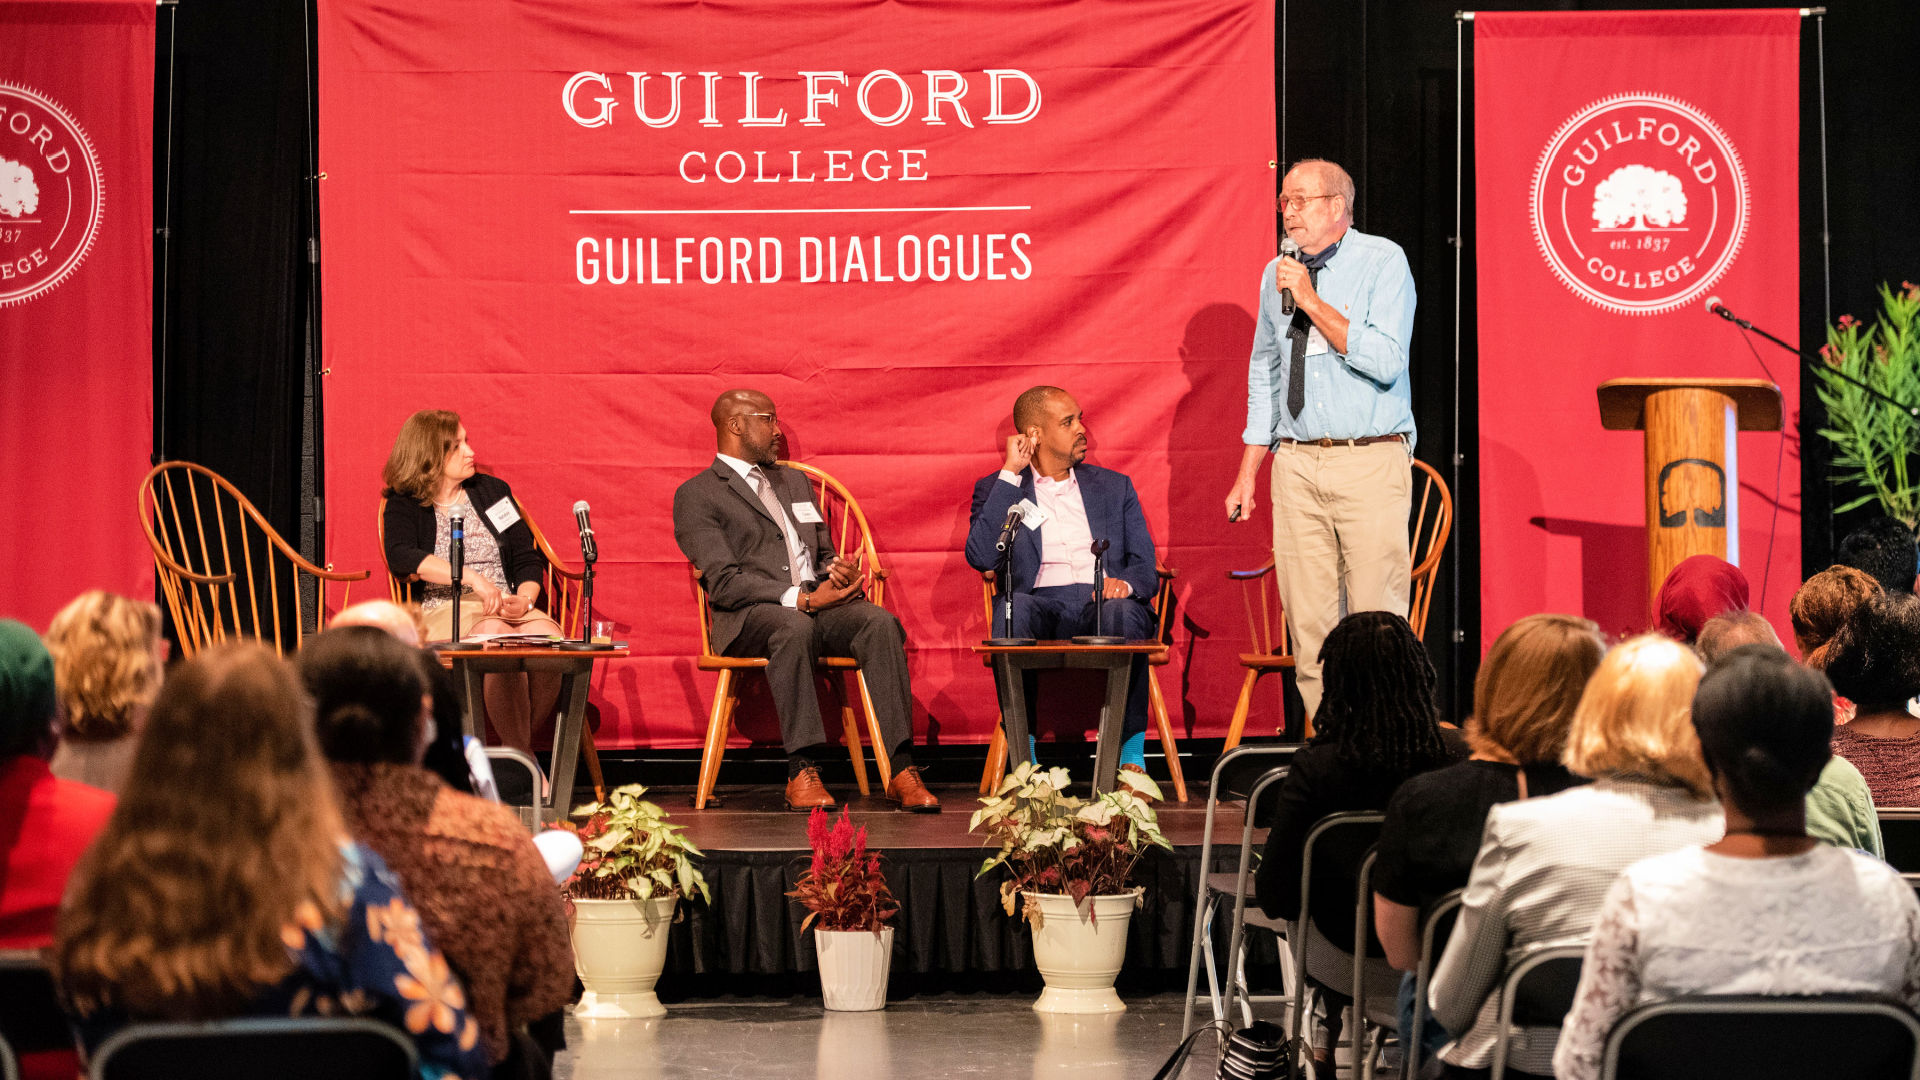 On stage from left at the Guilford Dialogues are: Natalya Shelkova, Taiwo Jaiyeoba, Chris Wheat, and Bob Williams.